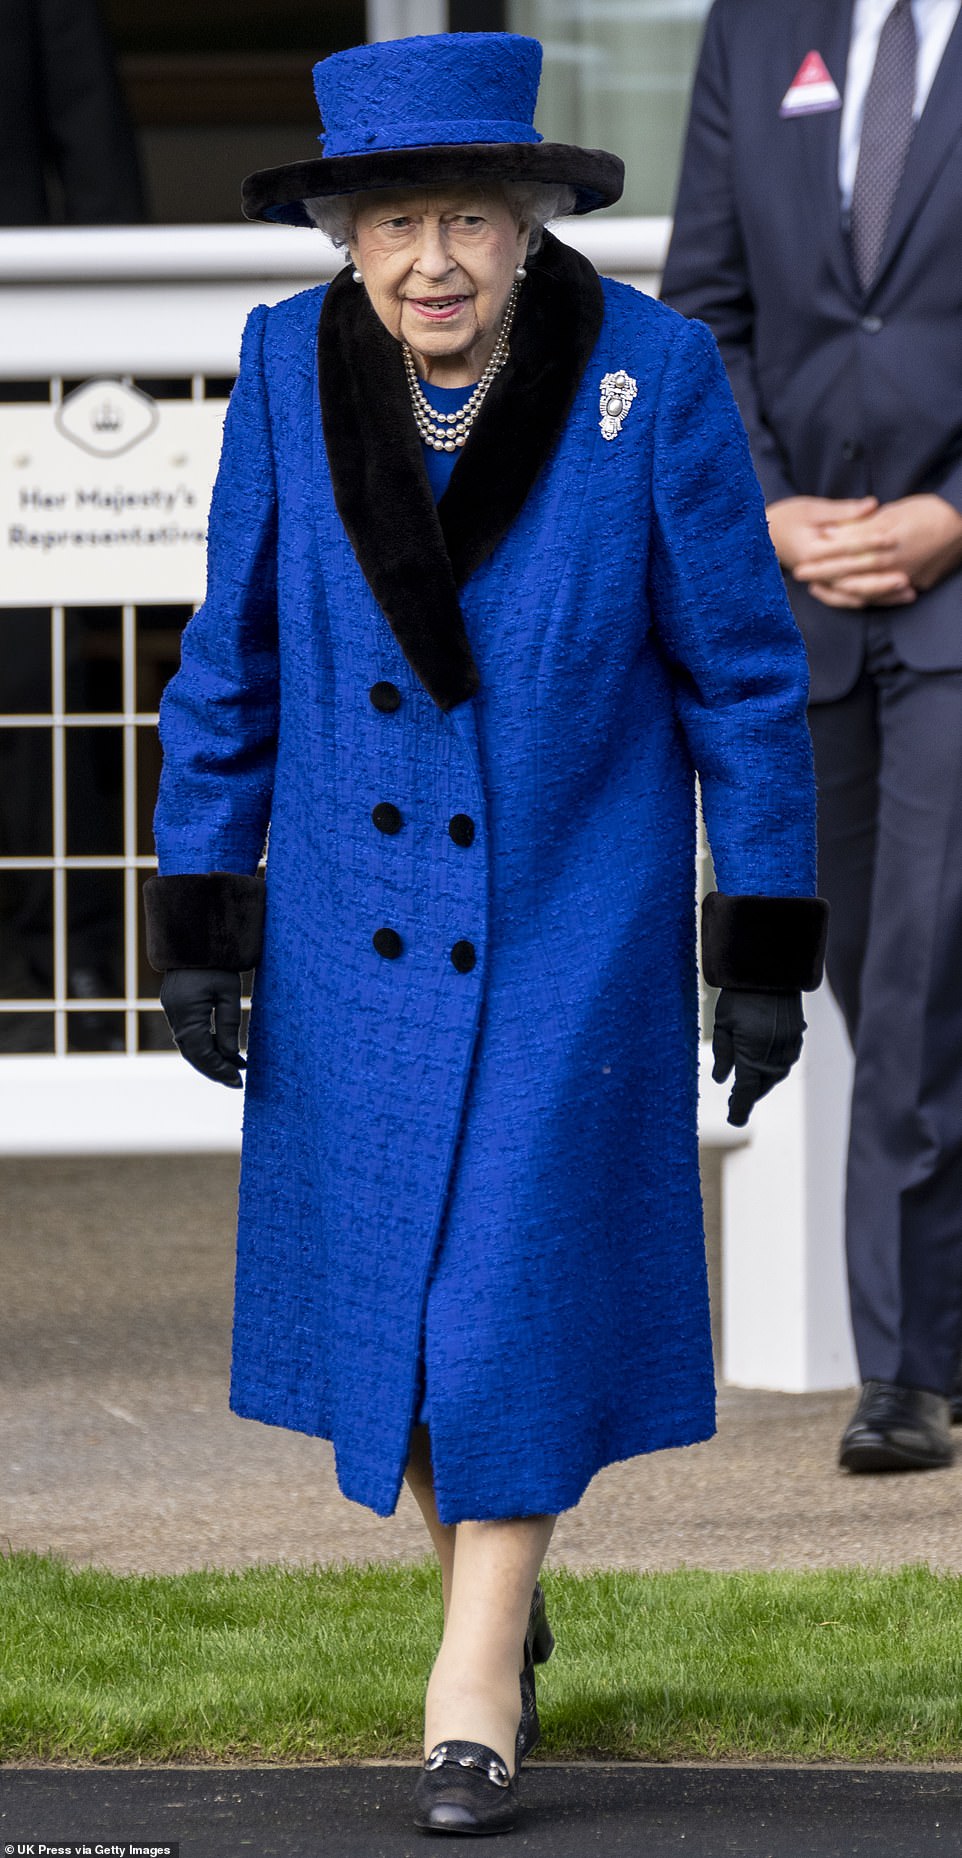 The Queen stepping out at the event, pictured